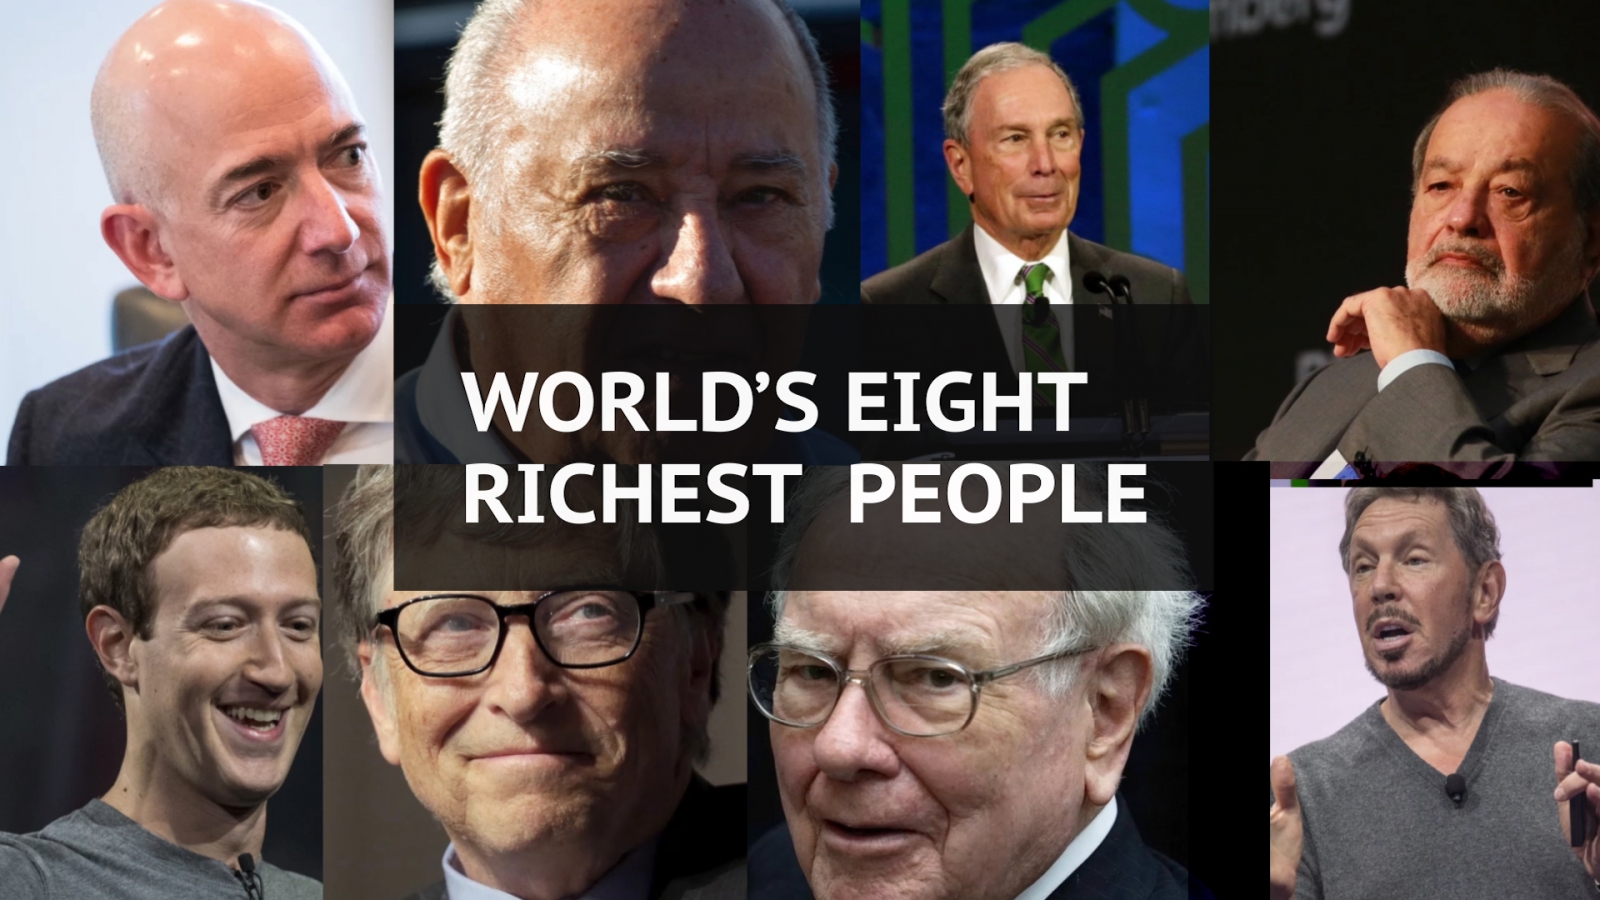 Who are the world’s eight richest people?